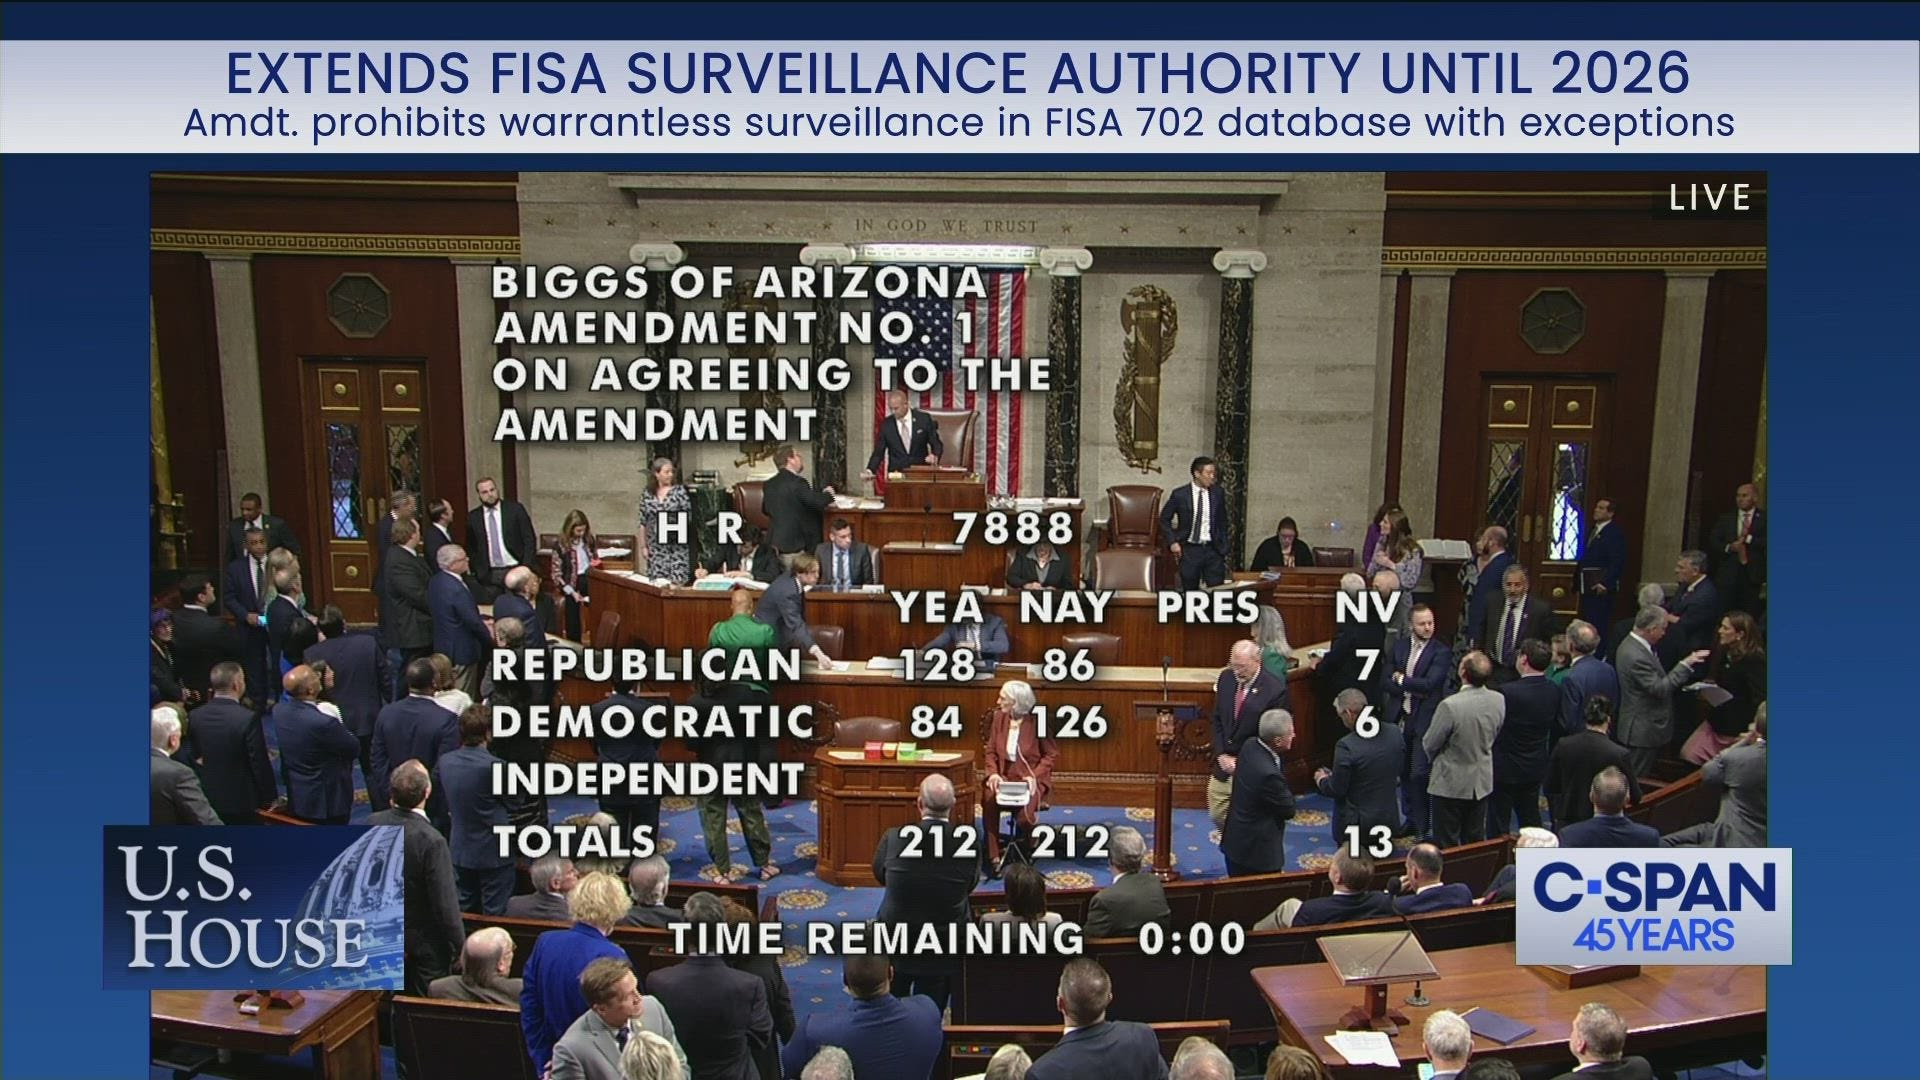  House defeated Rep. Andy Biggs (R-AZ)  warrantless surveillance requirement amendment to the FISA Section 702 bill  on a tie vote. WH issued a statement supporting the bill,but